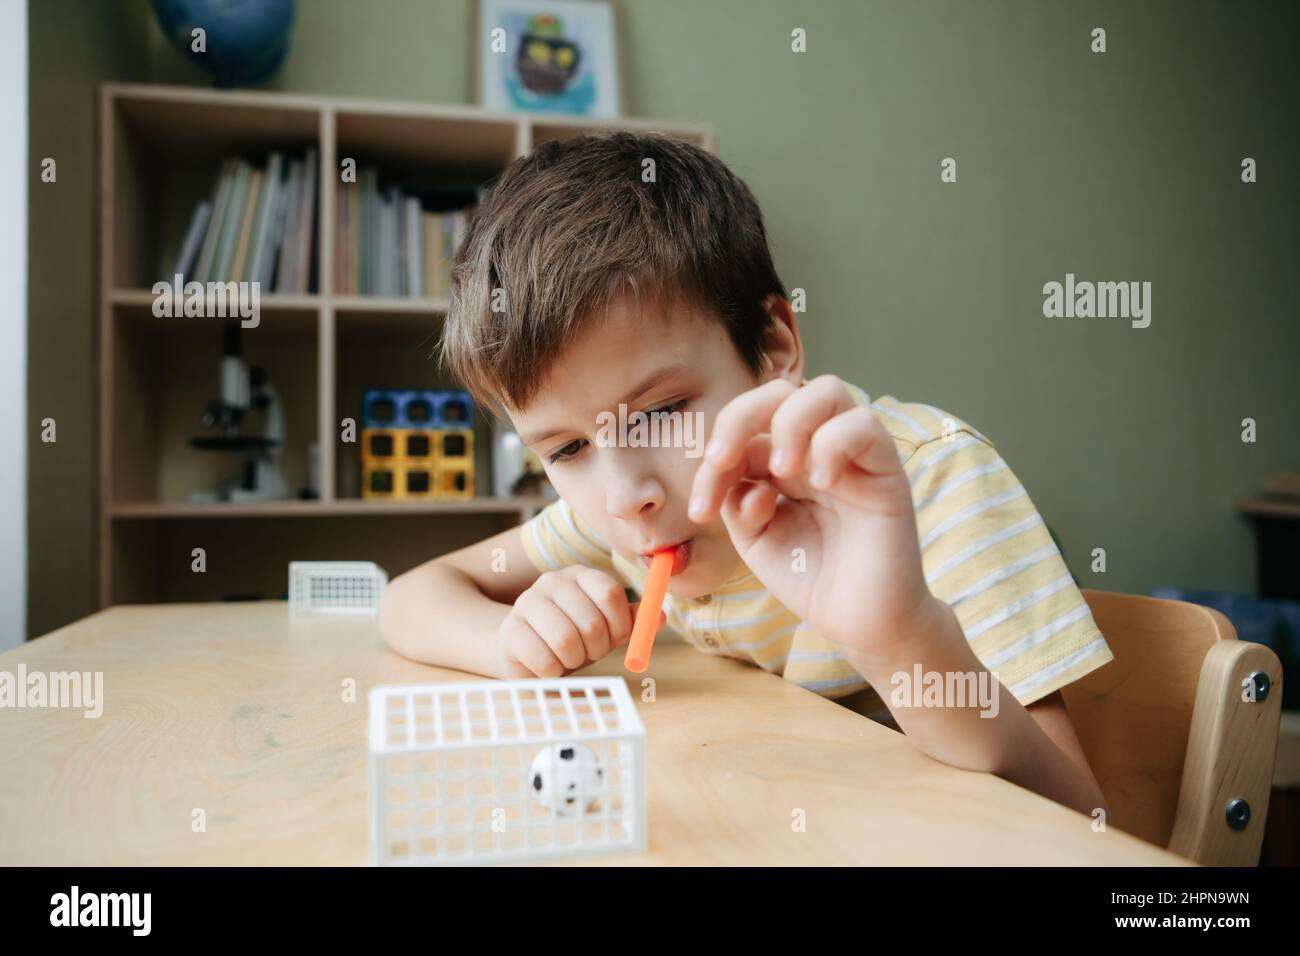 The child plays table football on the desk. Stock Photo